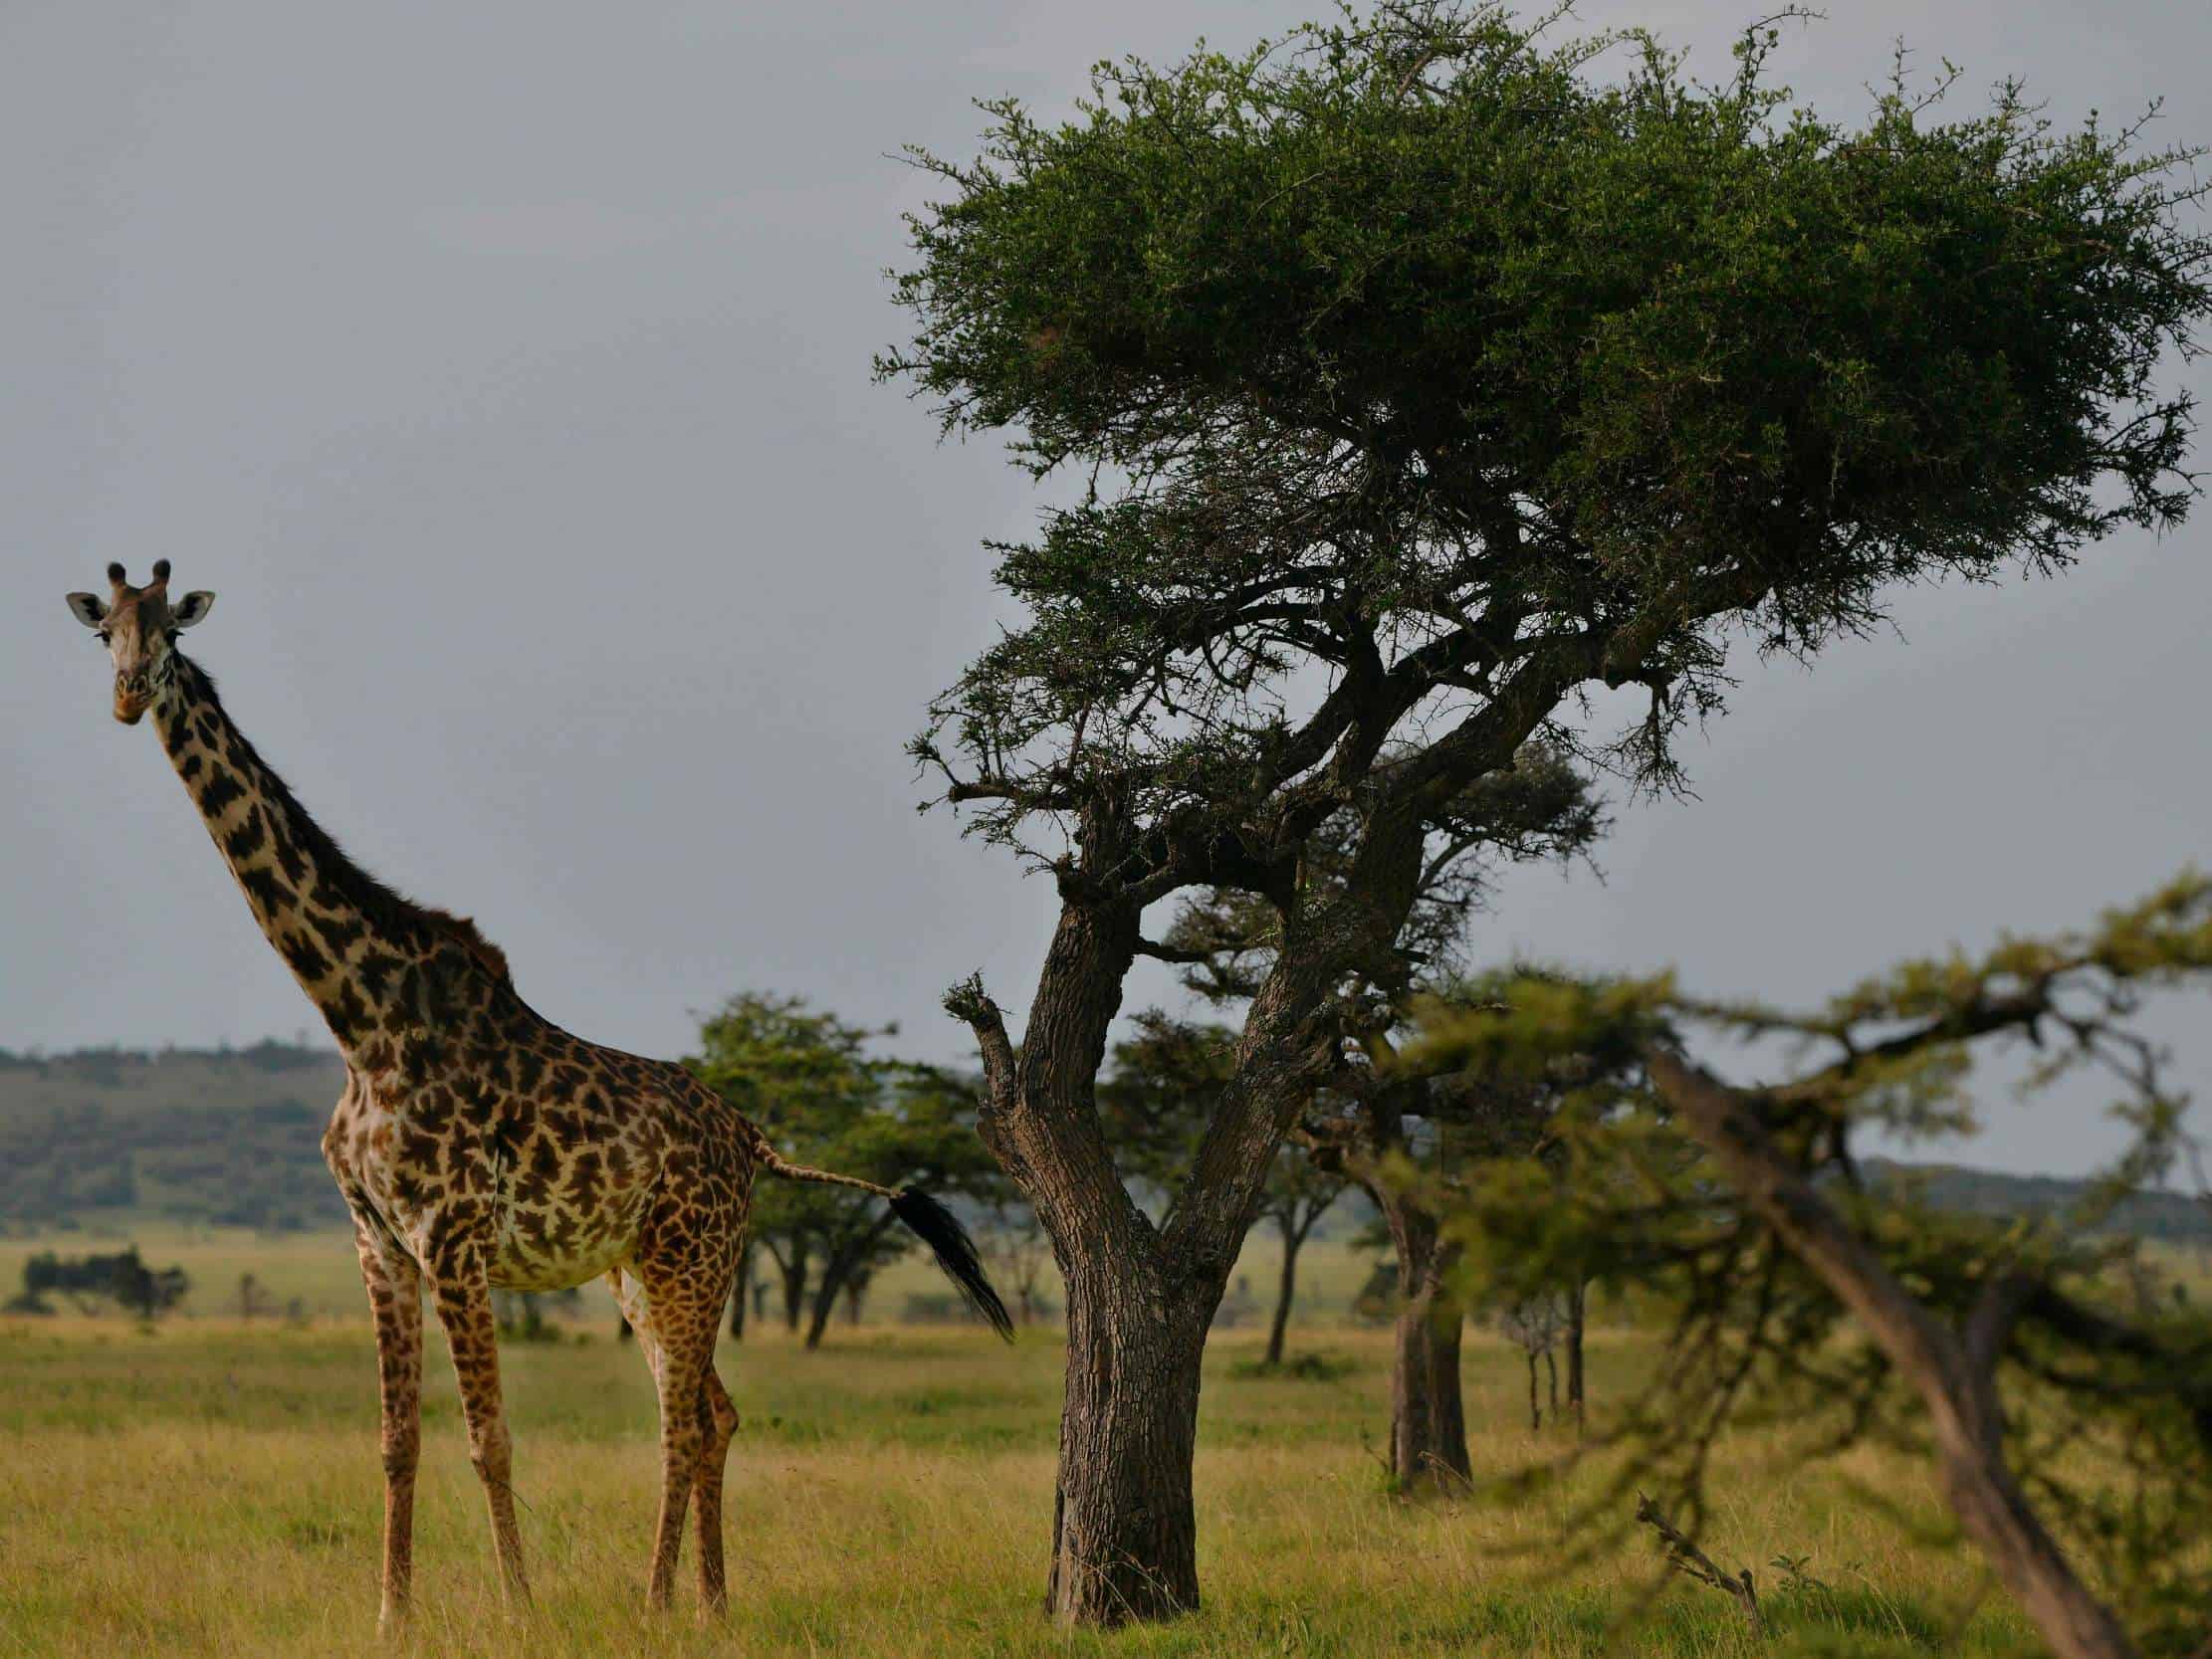 Giraffes are vulnerable to extinction. So why won’t America decide on protecting them until 2025?